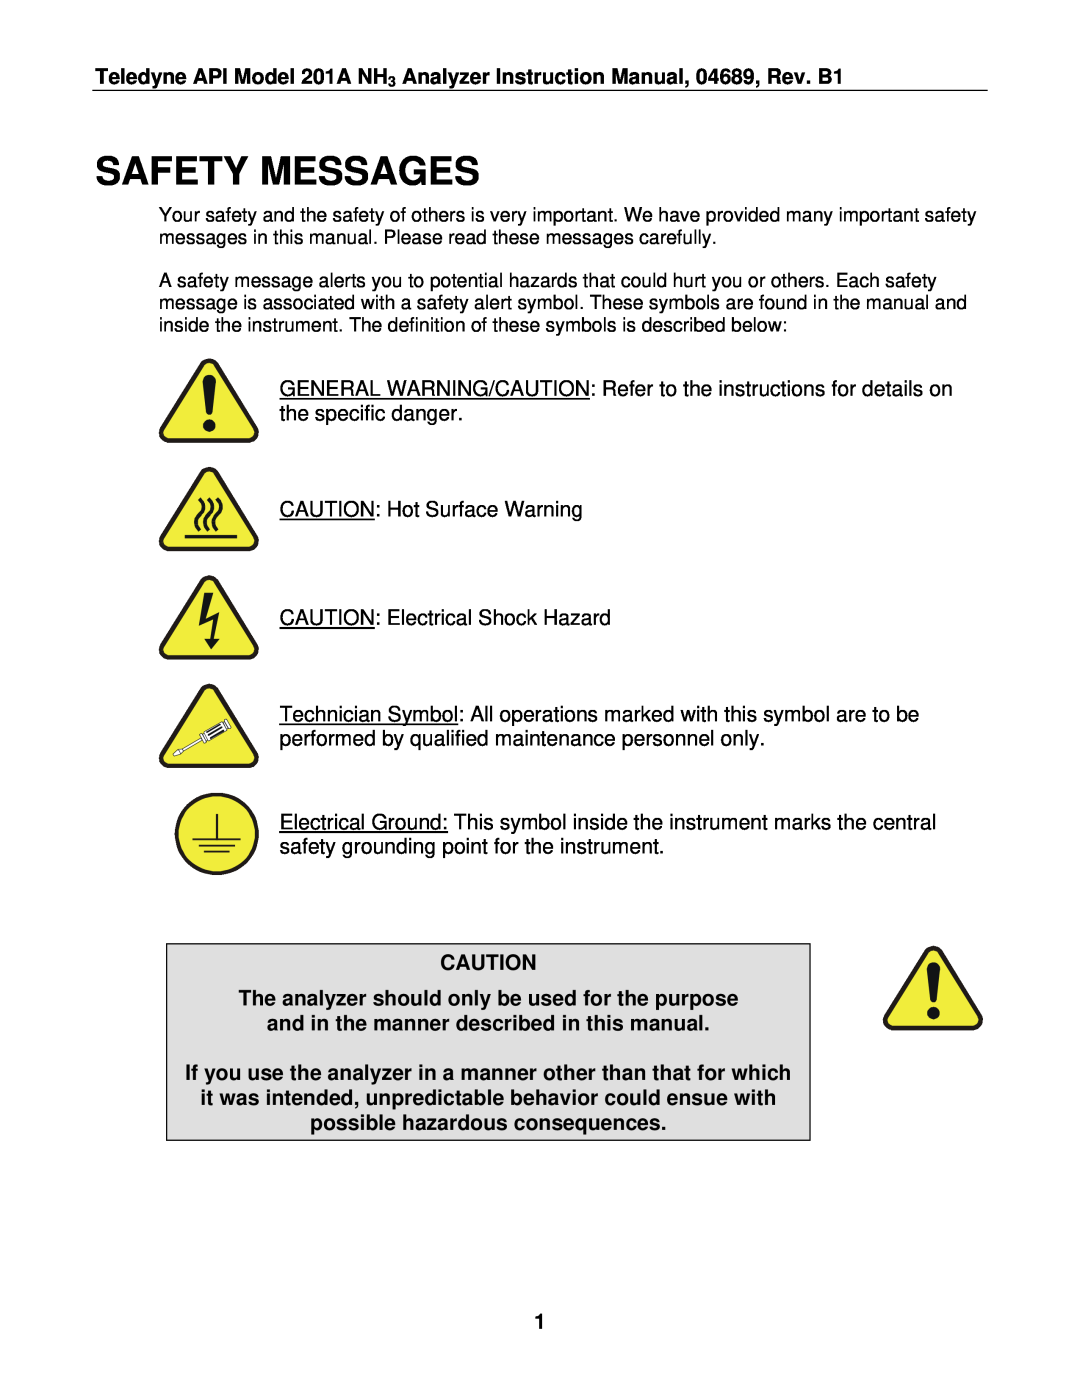 Teledyne 201A manual Safety Messages, The analyzer should only be used for the purpose 